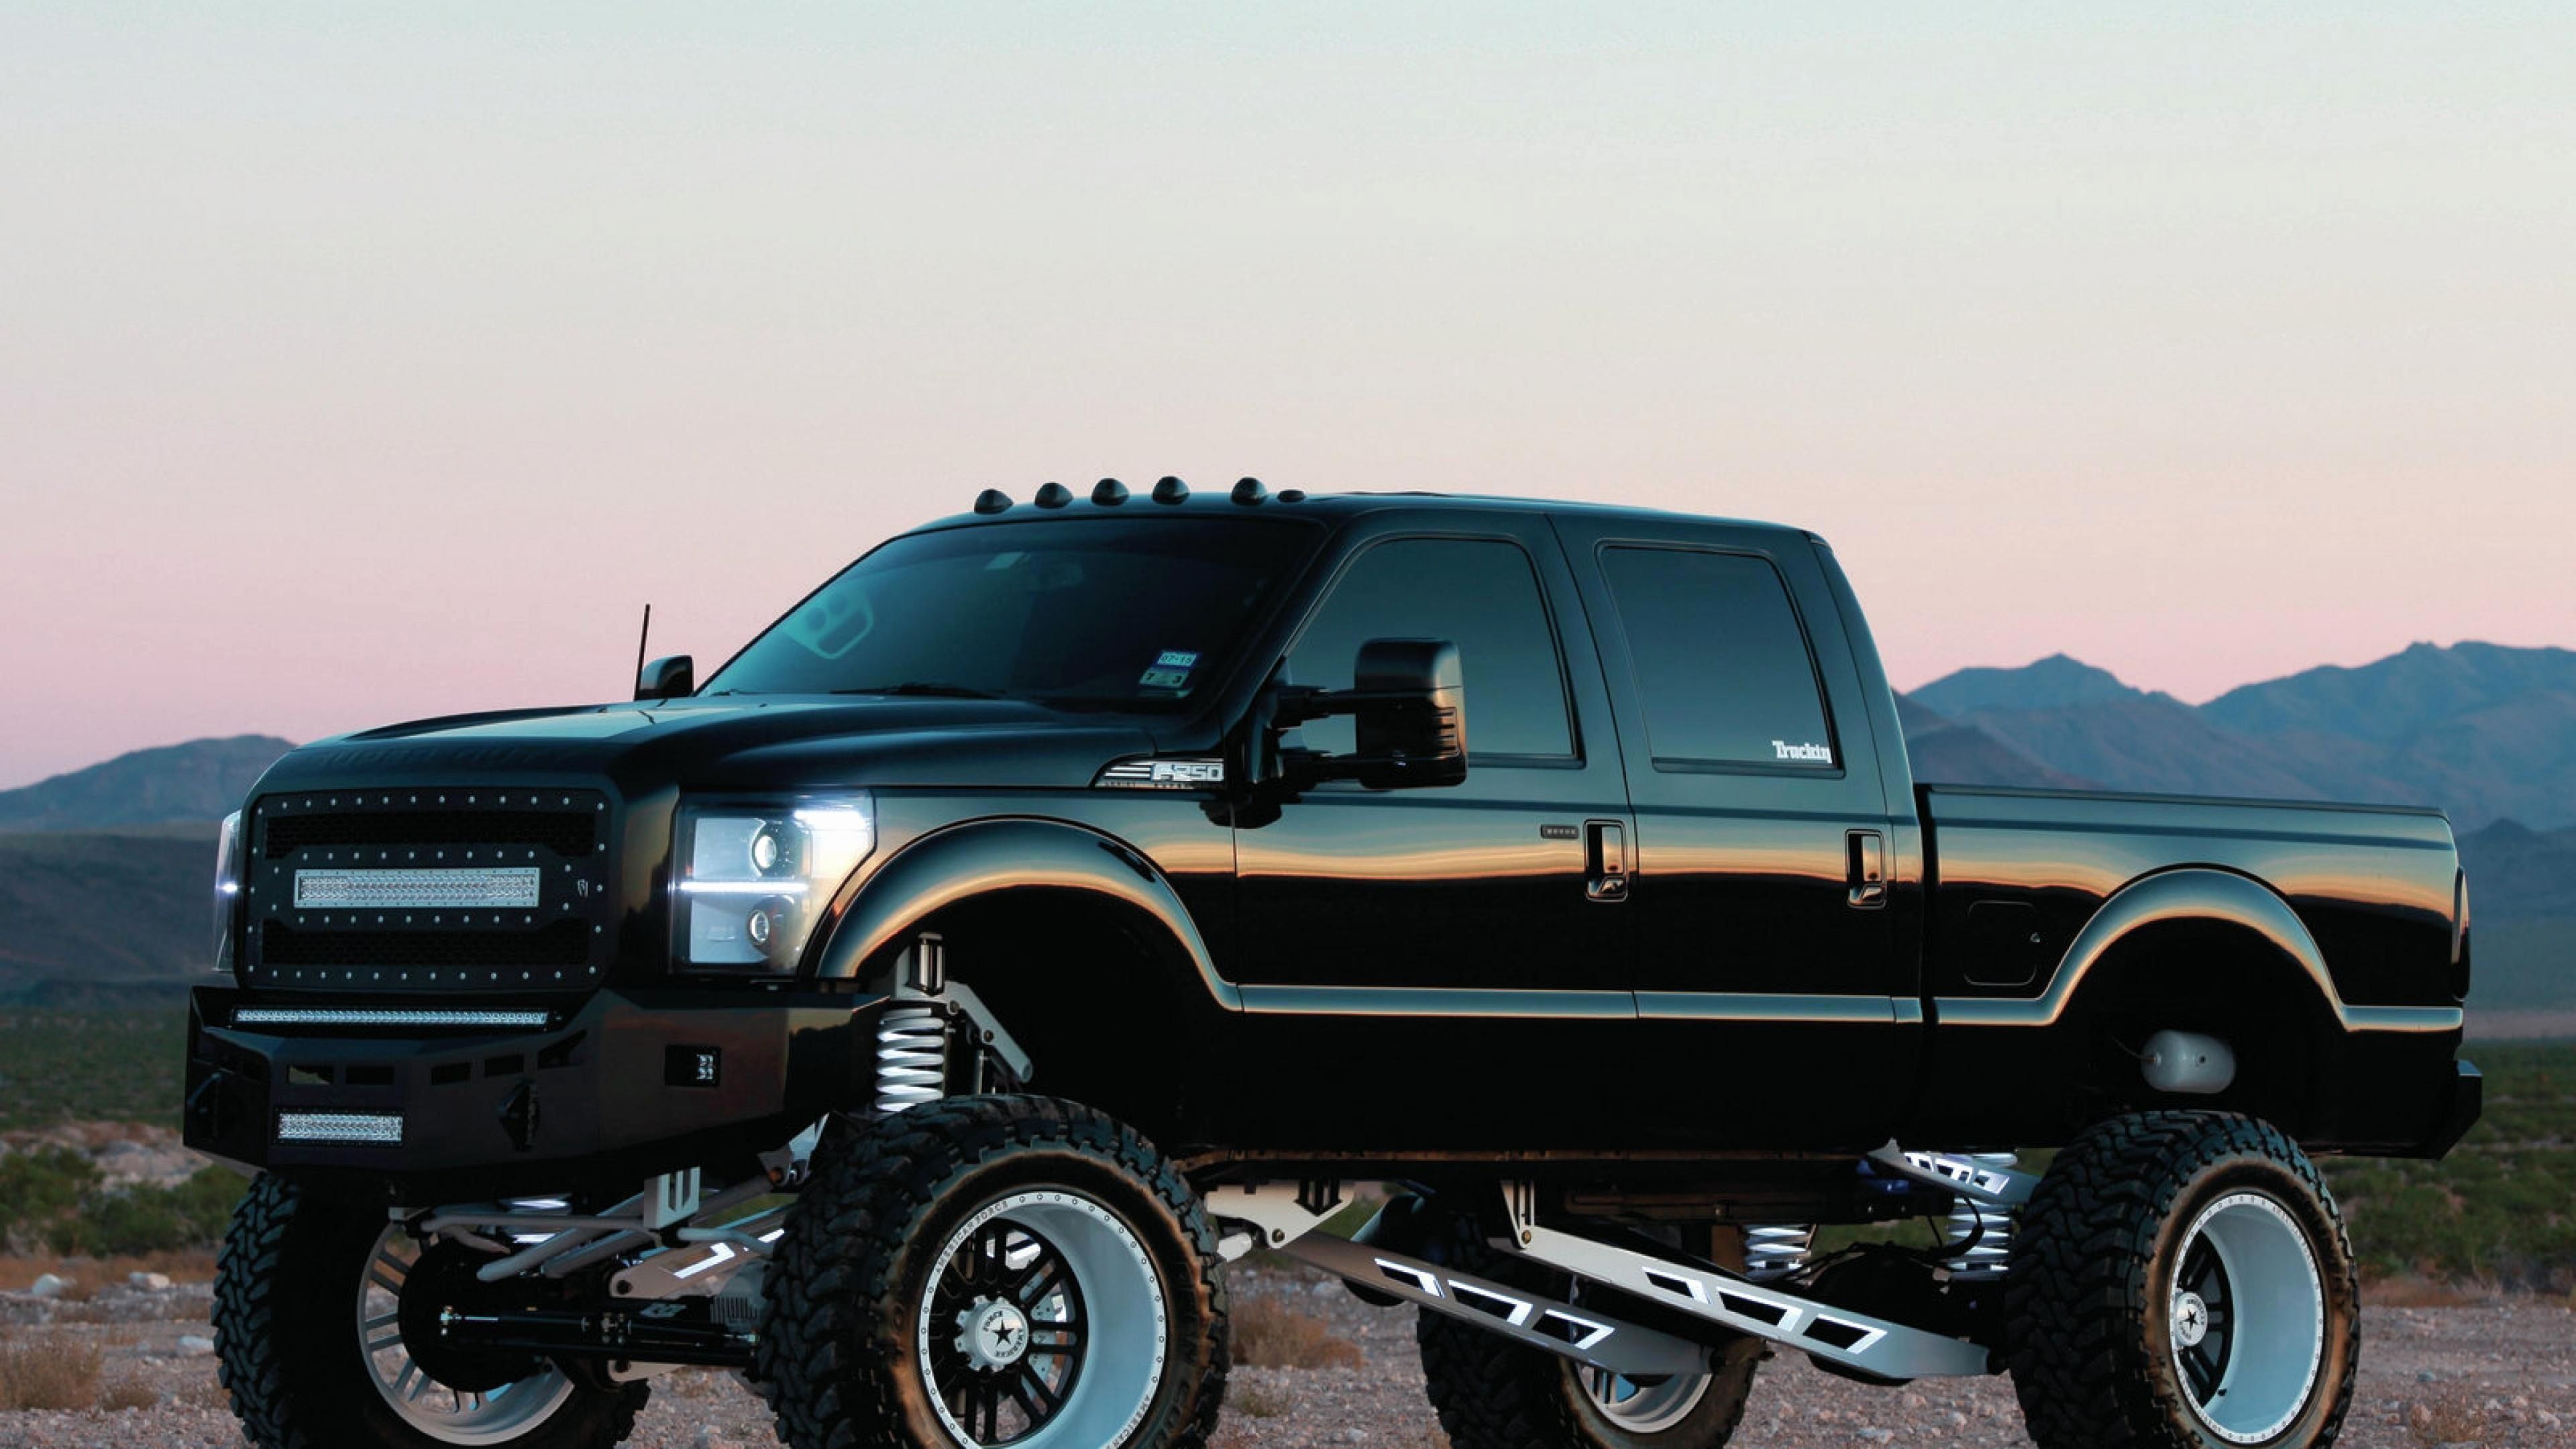 Diesel Truck Wallpaper New Lifted Trucks Wallpaper Of the Day of The Hudson